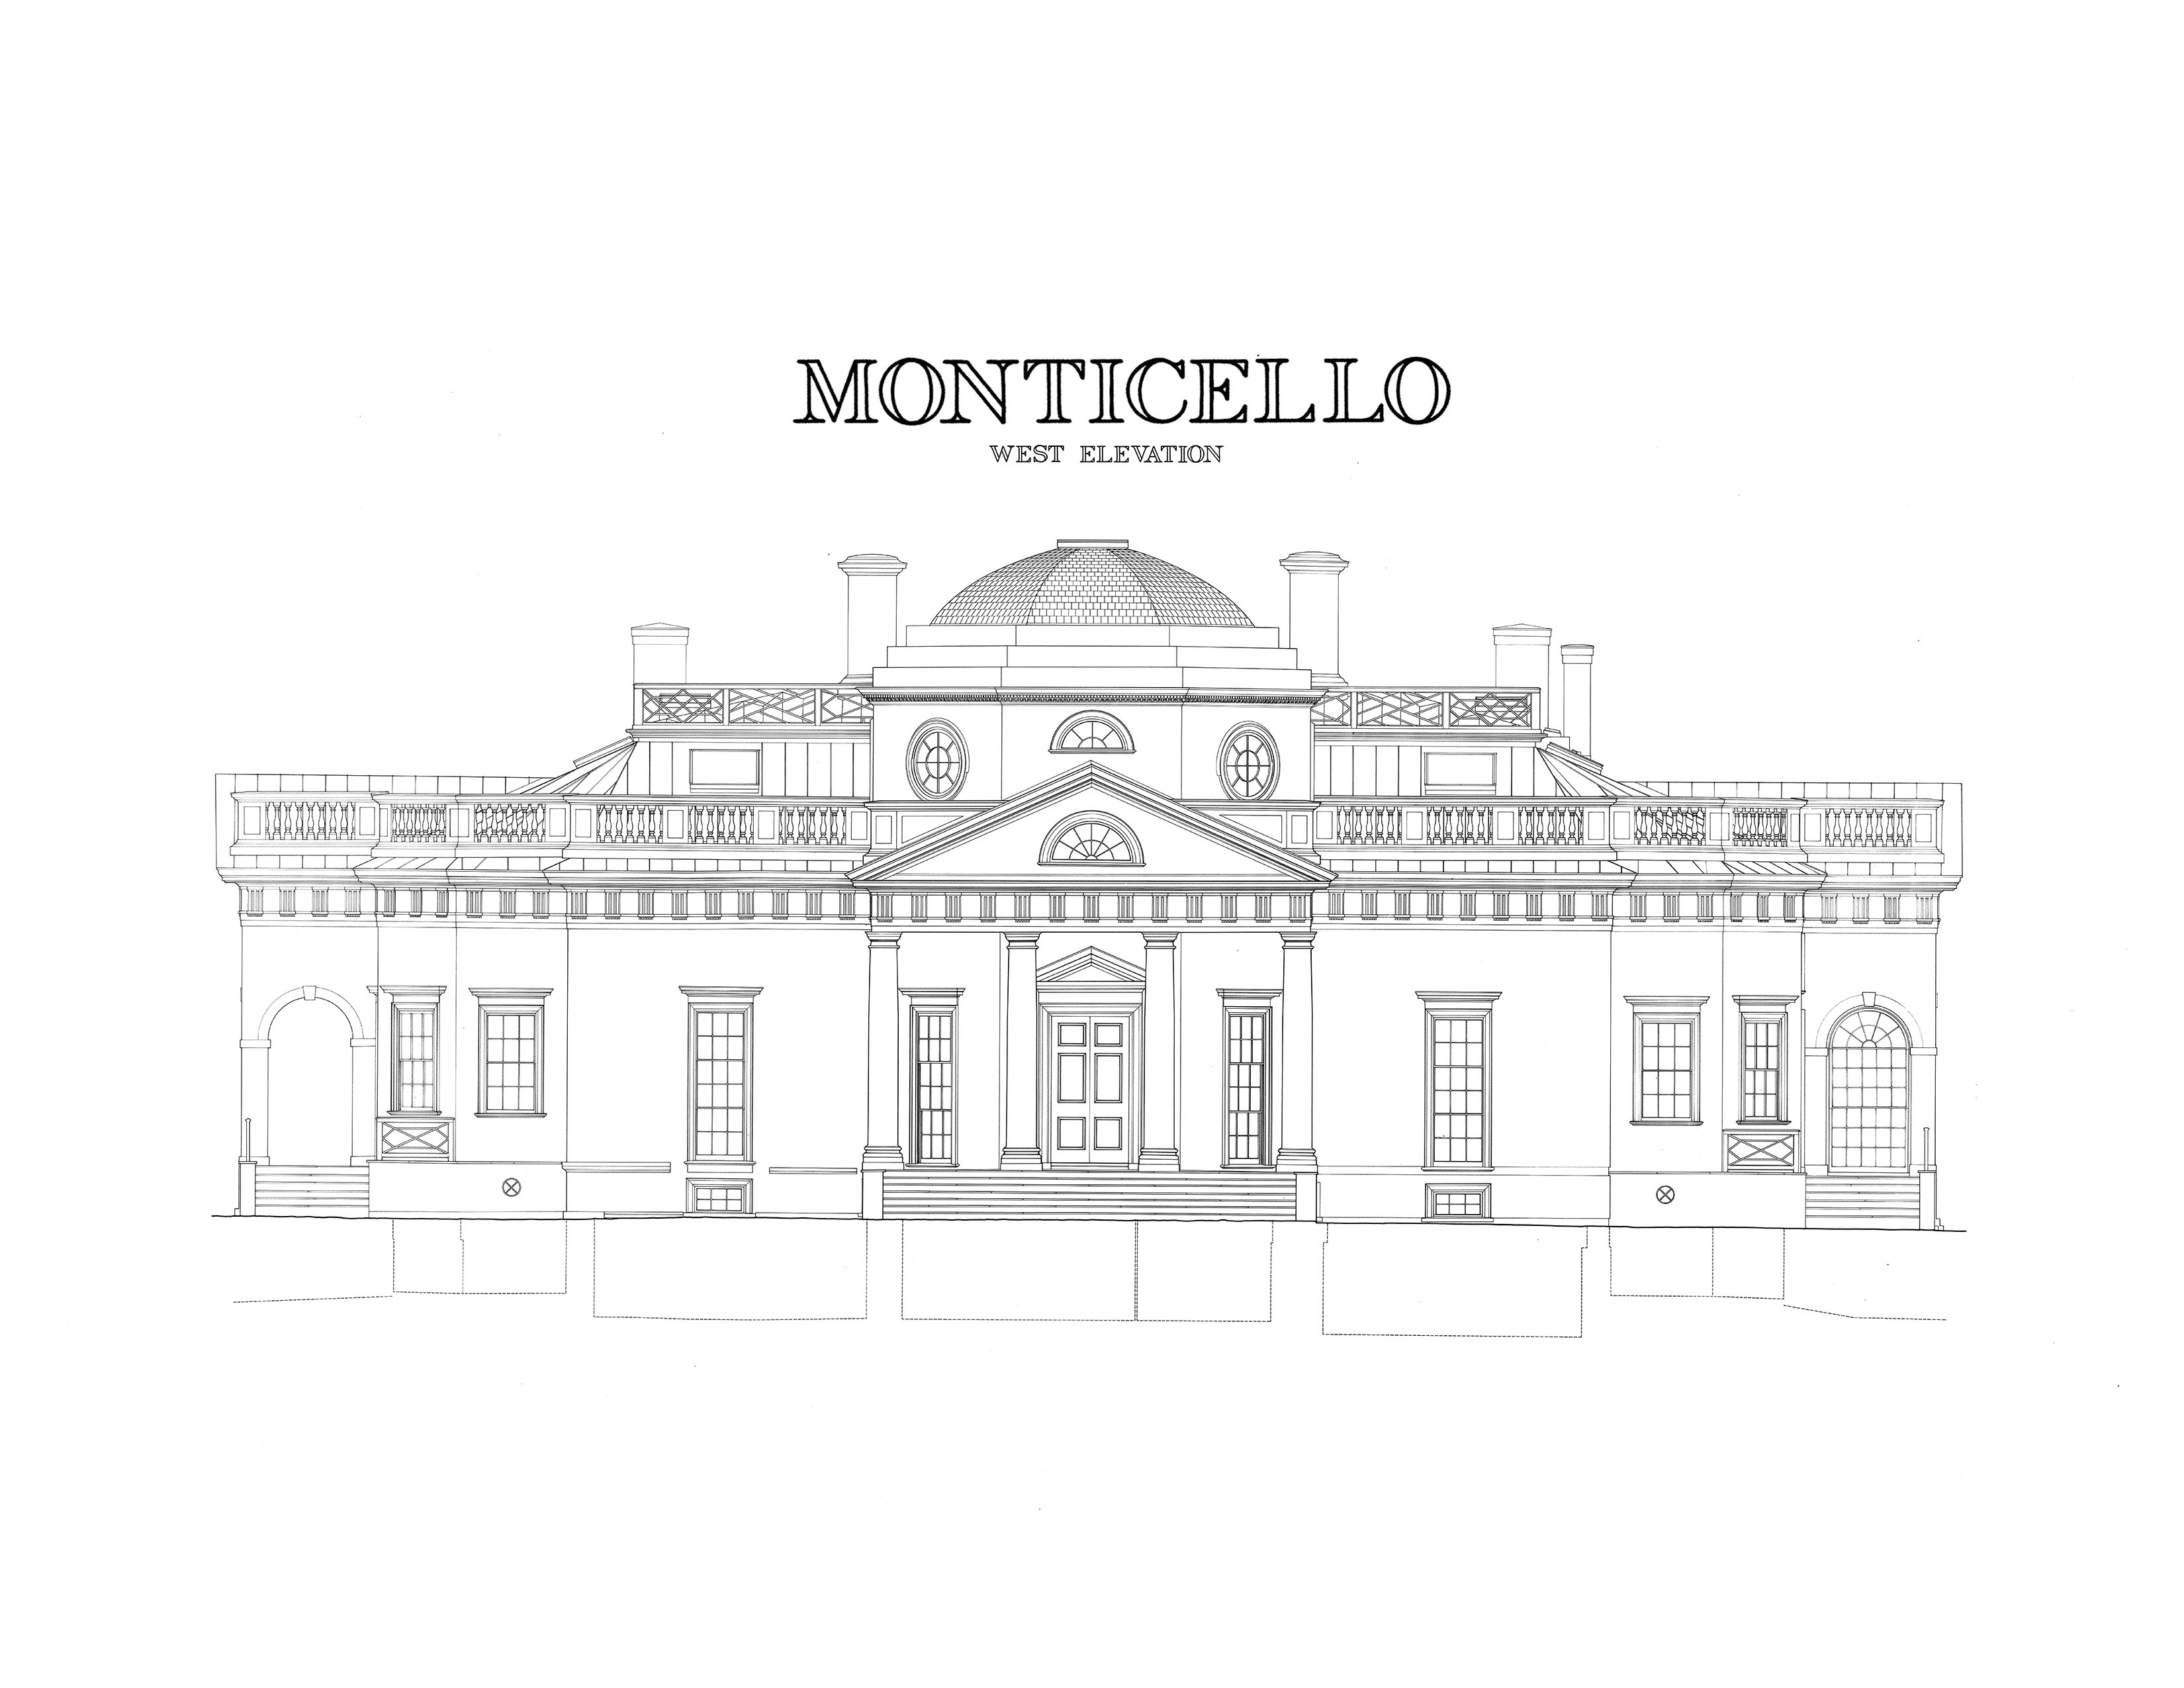 Elevation of Monticello's West Front